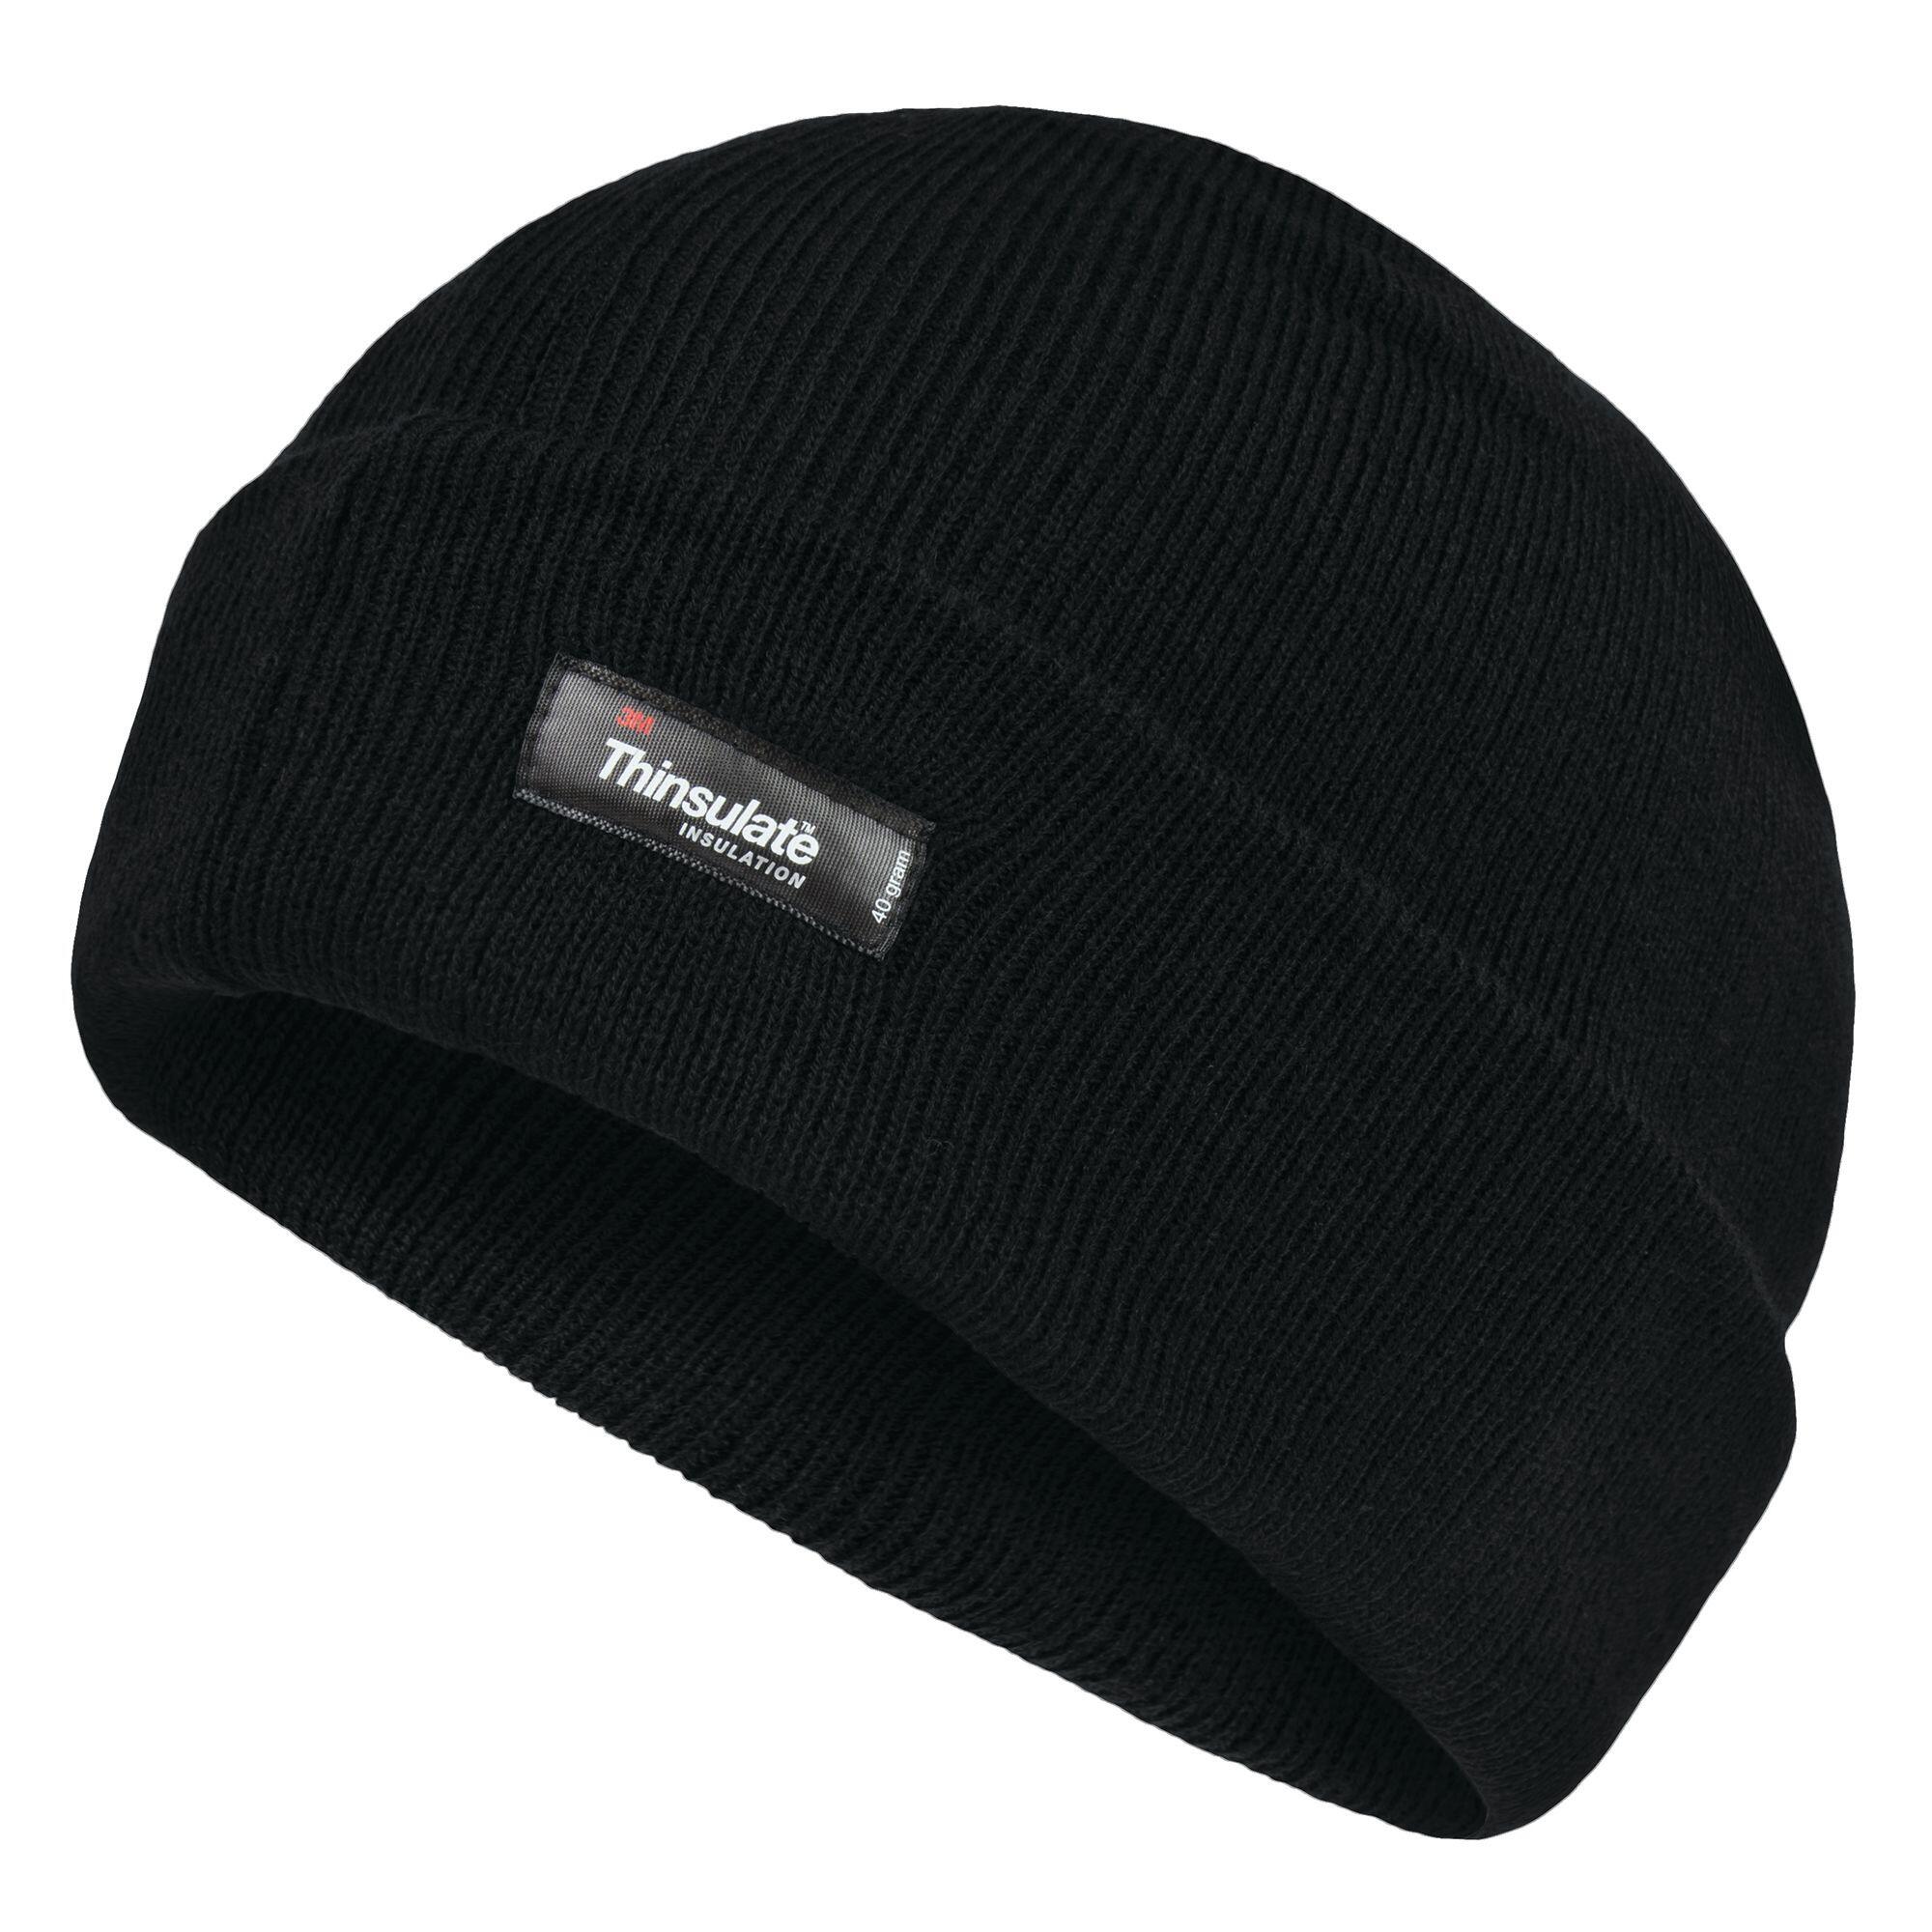 Mens Thinsulate Thermal Winter Hat (Black) 3/4